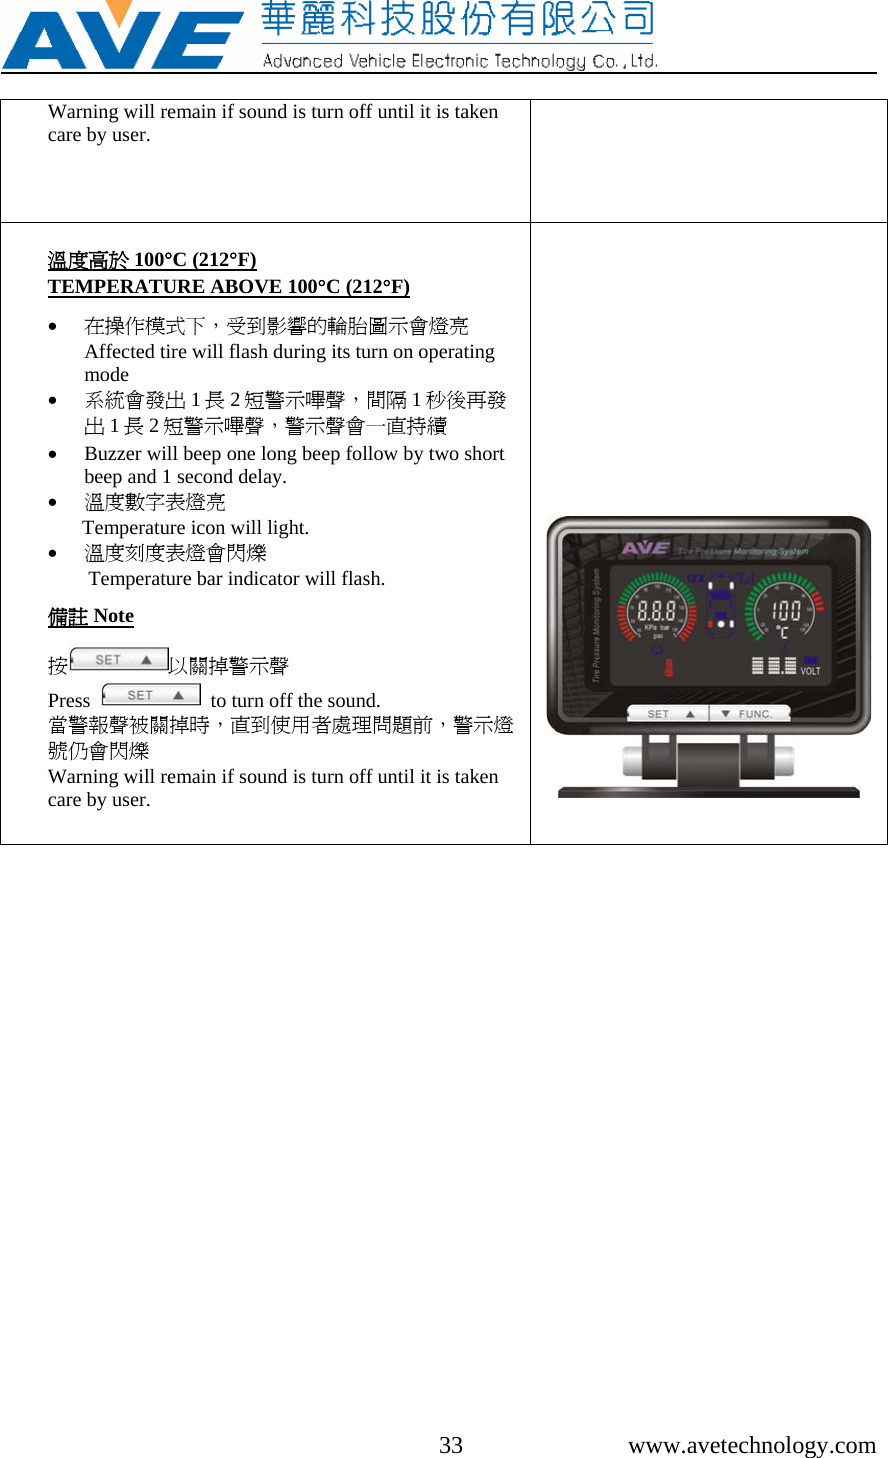     33 www.avetechnology.com Warning will remain if sound is turn off until it is taken care by user.    溫度高於 100°C (212°F) TEMPERATURE ABOVE 100°C (212°F)  • 在操作模式下，受到影響的輪胎圖示會燈亮Affected tire will flash during its turn on operating mode • 系統會發出 1長2短警示嗶聲，間隔 1秒後再發出1長2短警示嗶聲，警示聲會一直持續 • Buzzer will beep one long beep follow by two short beep and 1 second delay. • 溫度數字表燈亮 Temperature icon will light. • 溫度刻度表燈會閃爍 Temperature bar indicator will flash.  備註 Note  按以關掉警示聲 Press     to turn off the sound. 當警報聲被關掉時，直到使用者處理問題前，警示燈號仍會閃爍 Warning will remain if sound is turn off until it is taken care by user.     